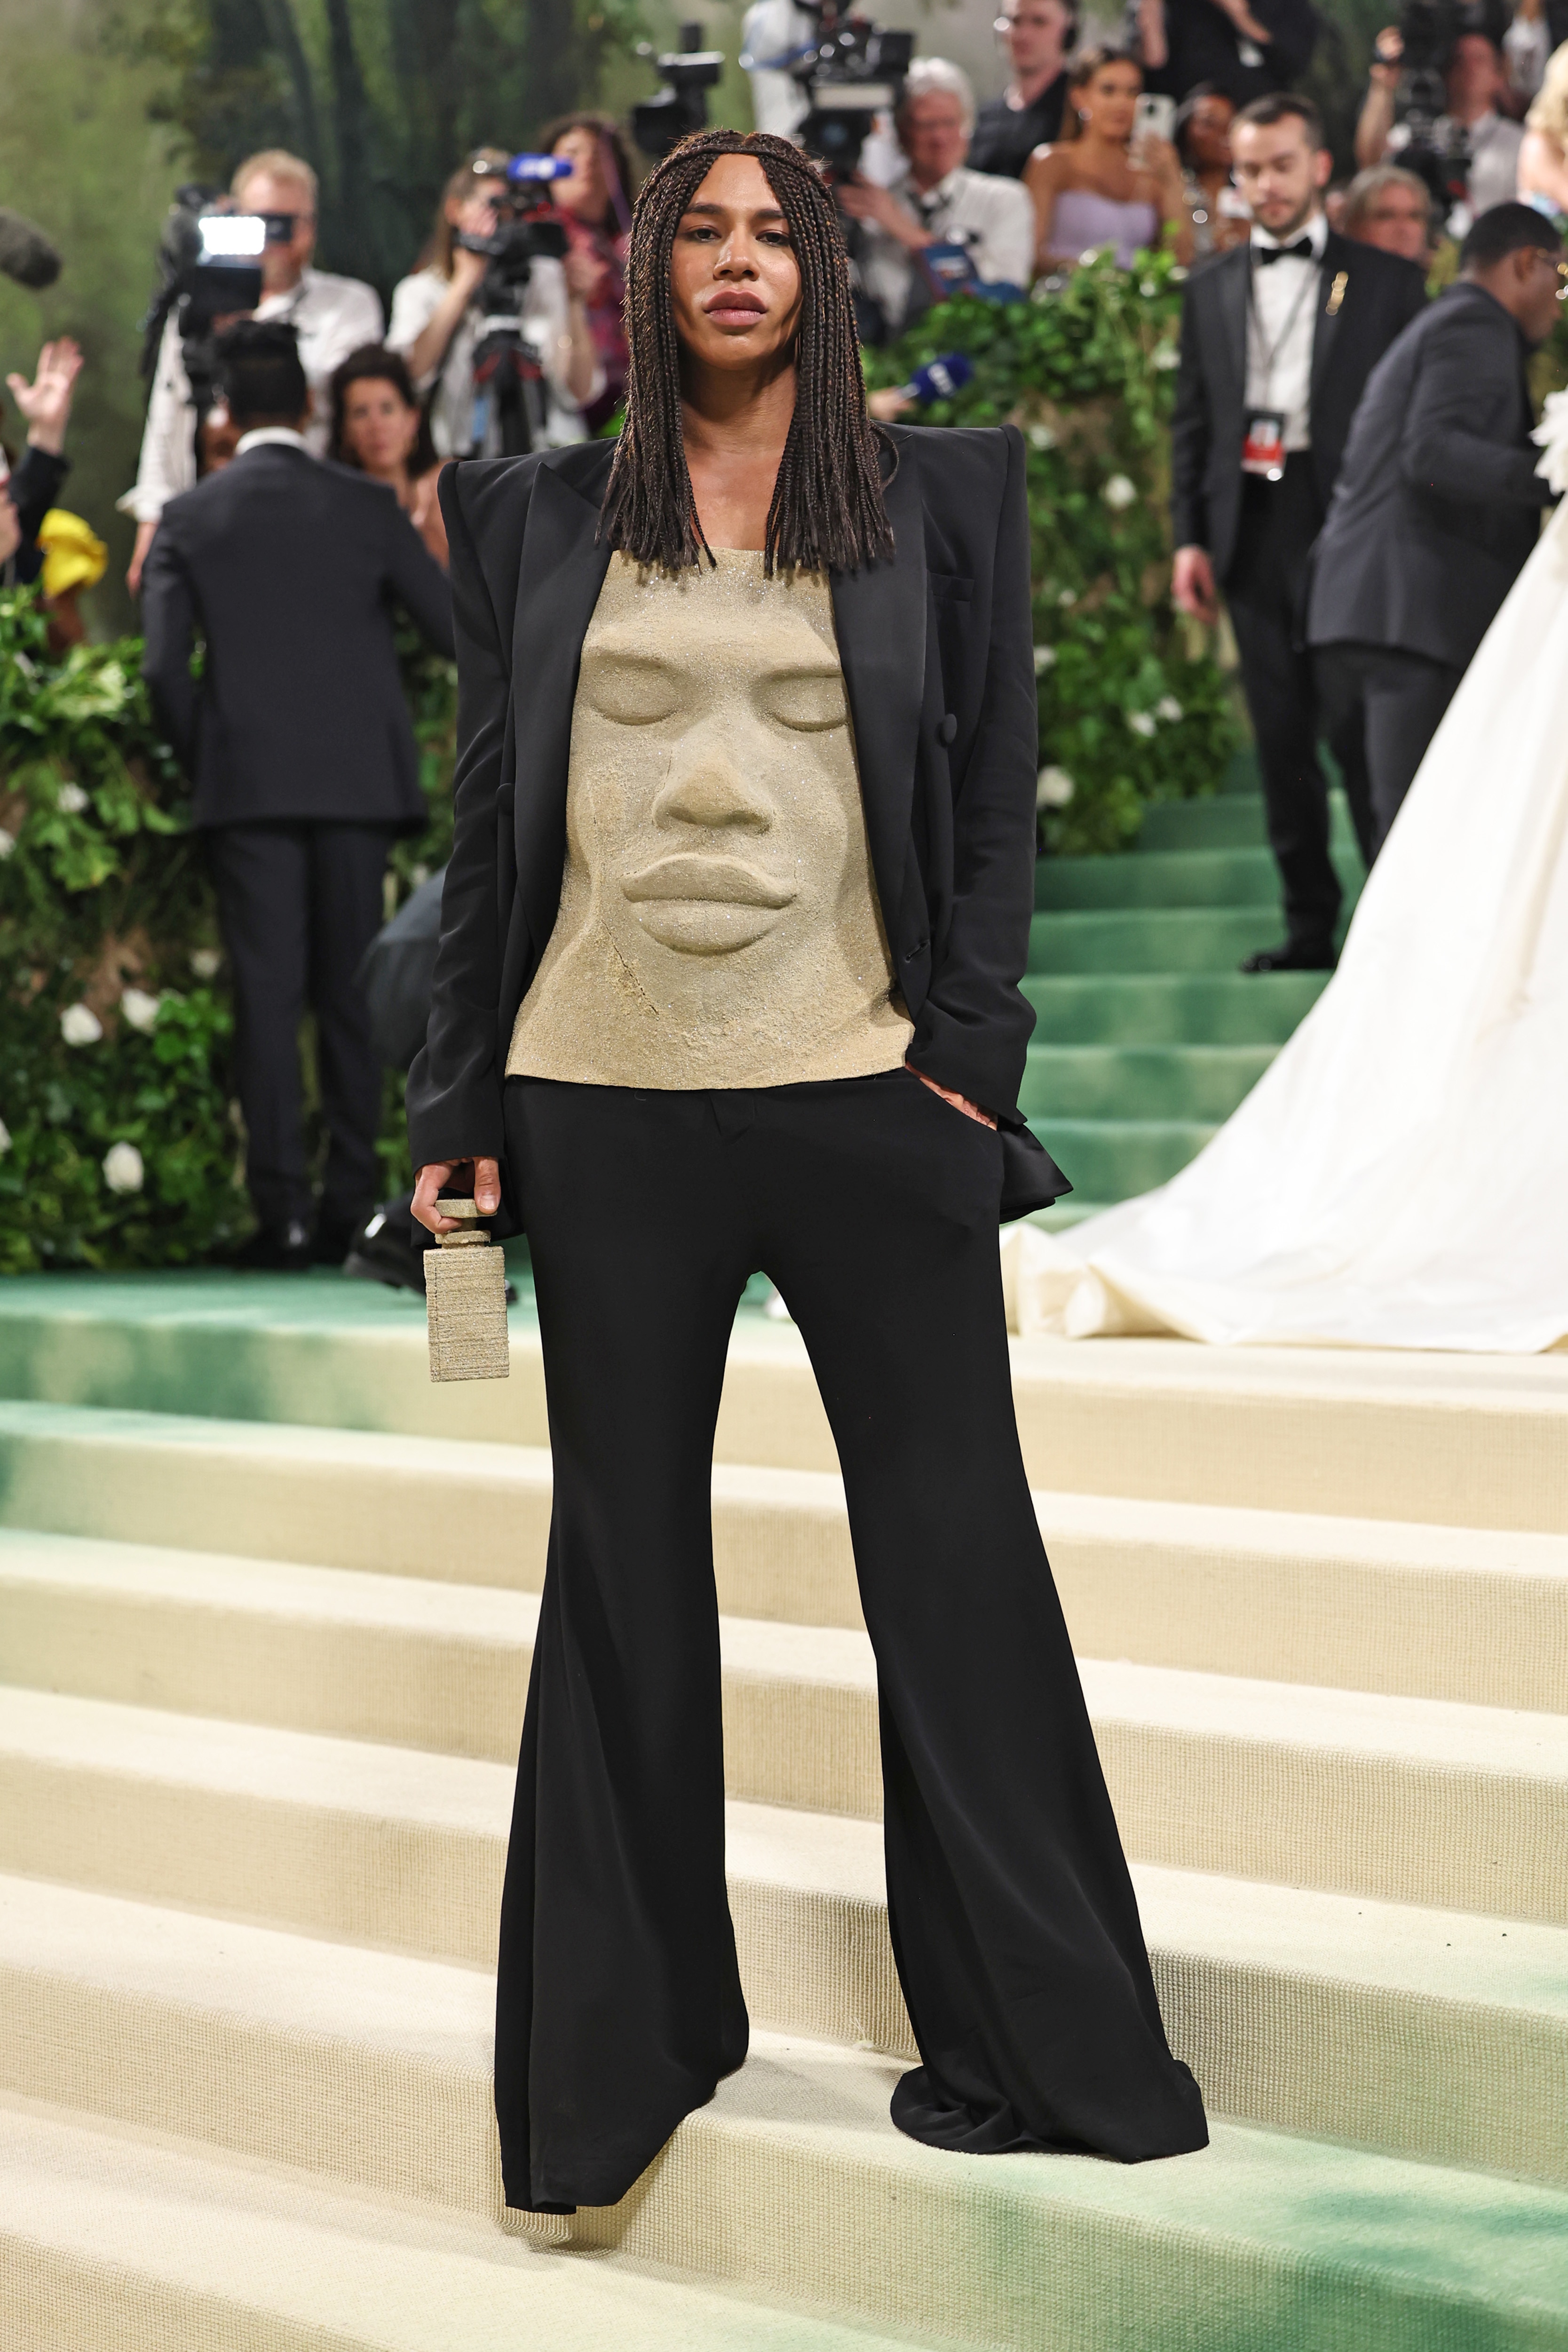 A black man with braids on the Met Gala steps in black pants and blazer, with a shirt made of sand in the shape of his face.